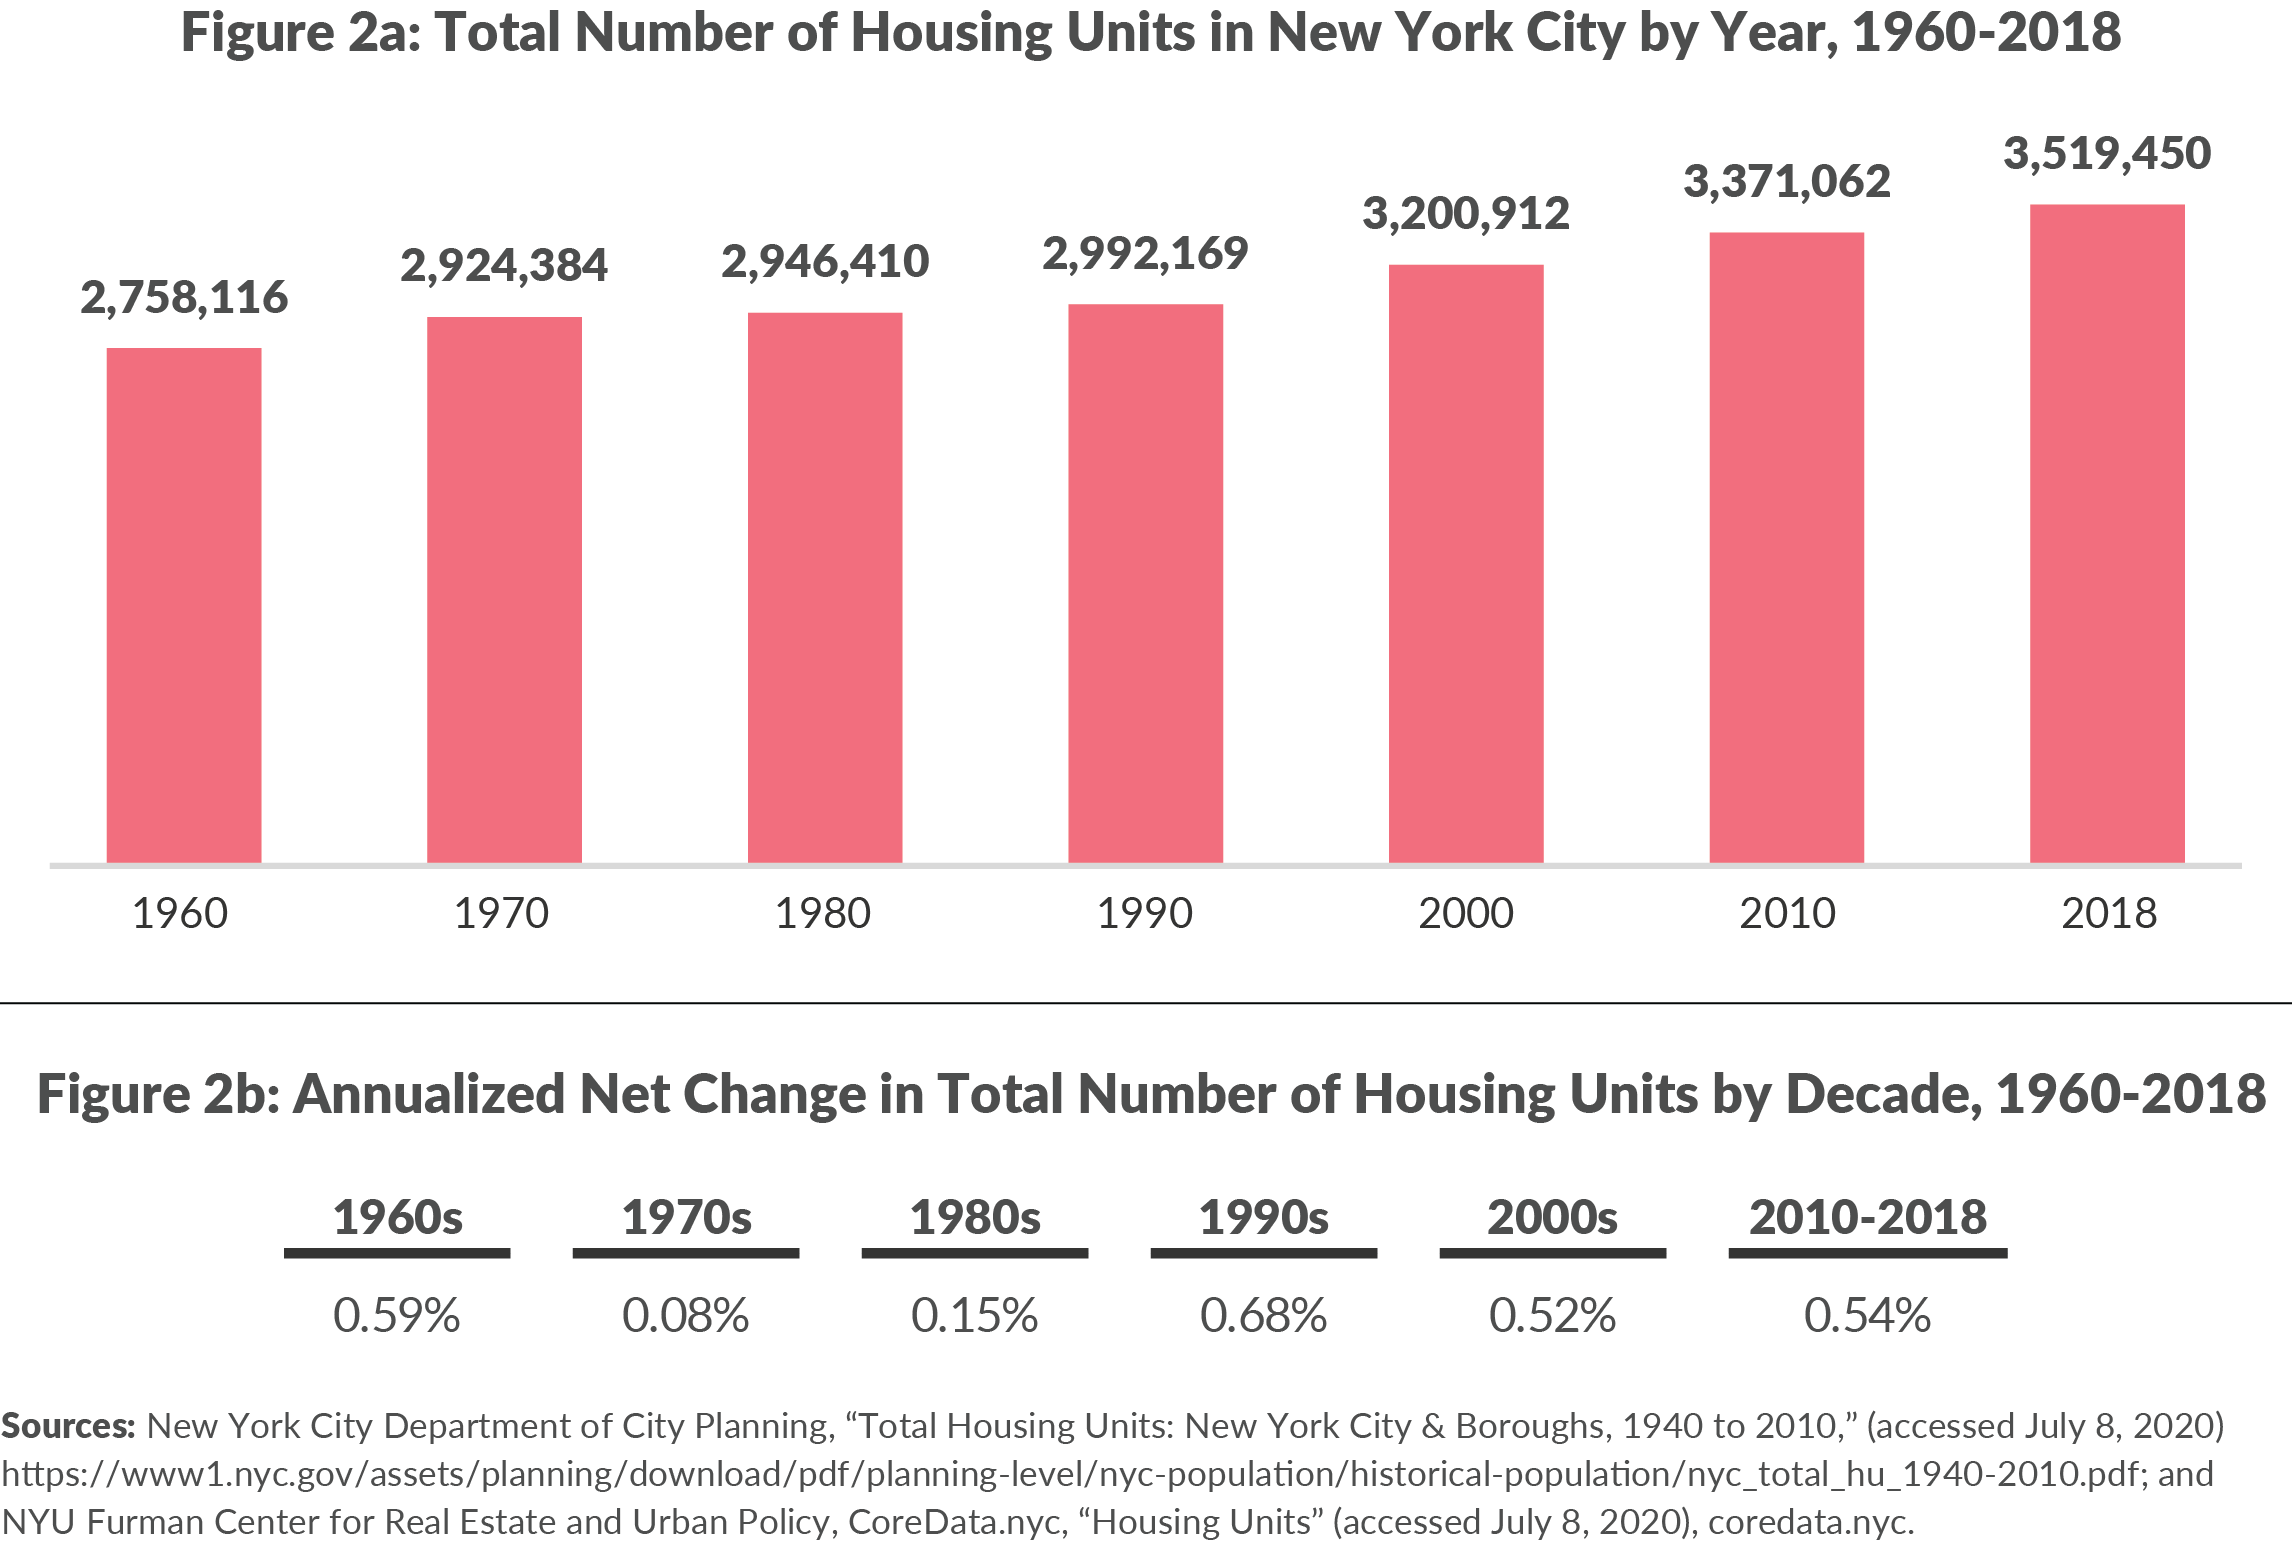 Figure 2a. Total Number of Housing Units in New York City by Decade, 1960-2018